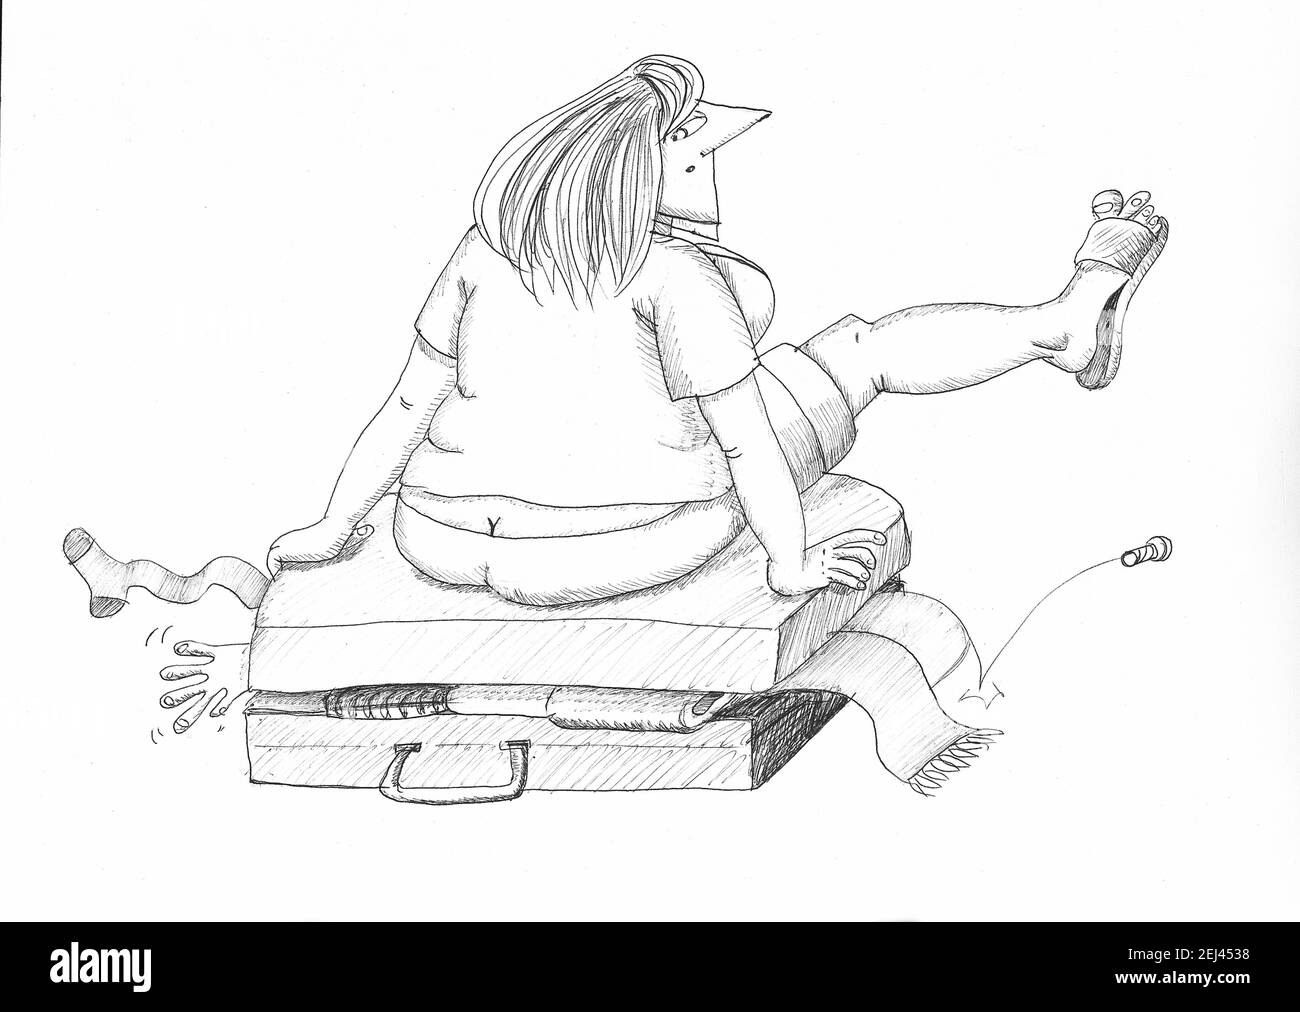 Fat woman packing her suitcase. Illustration. Stock Photo